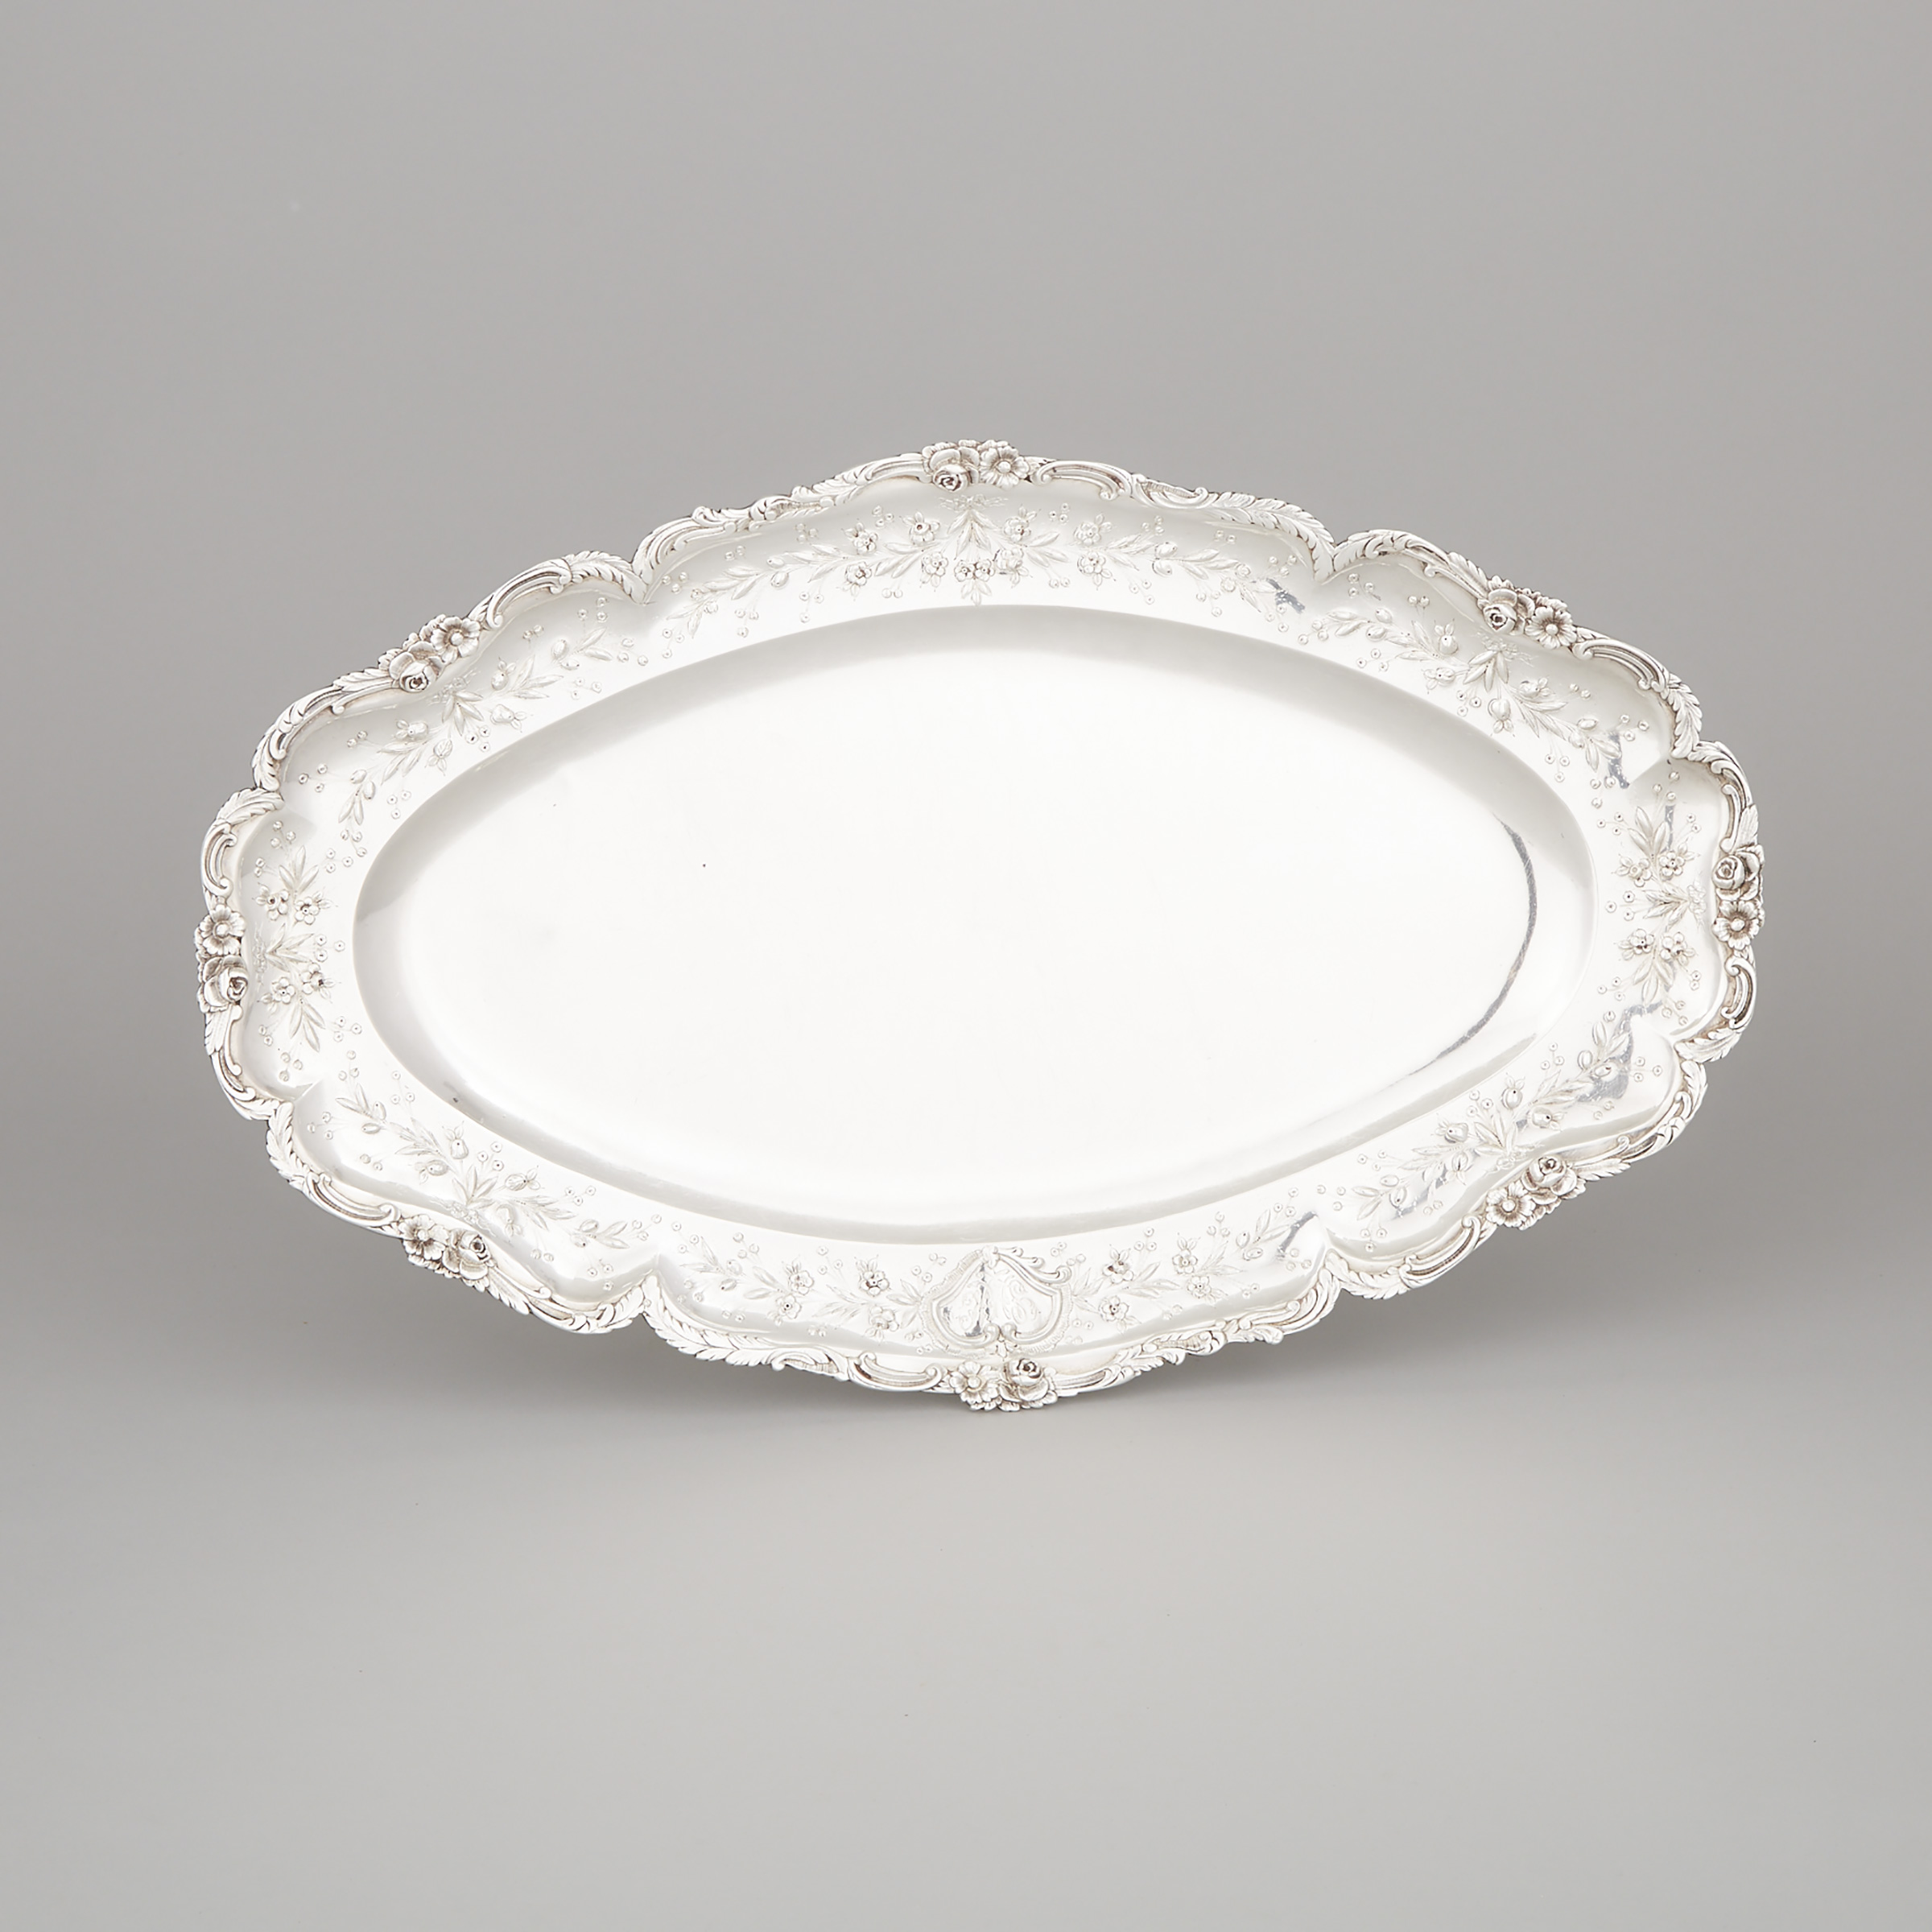 French Silver Oval Tray, Emile Delaire, Paris, c.1900